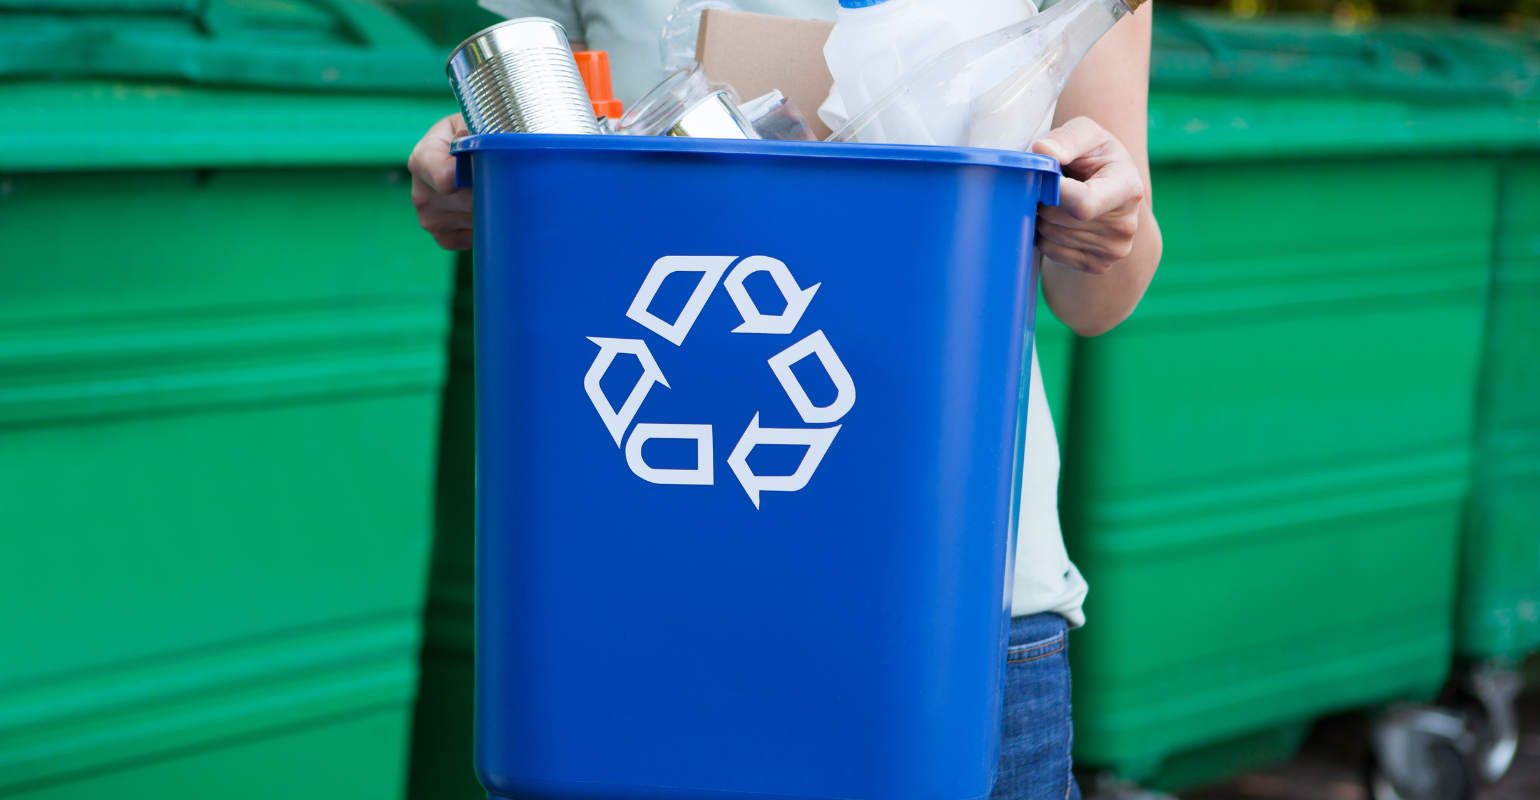 What Is The Purpose Of Recycling, Why Is It So Important?